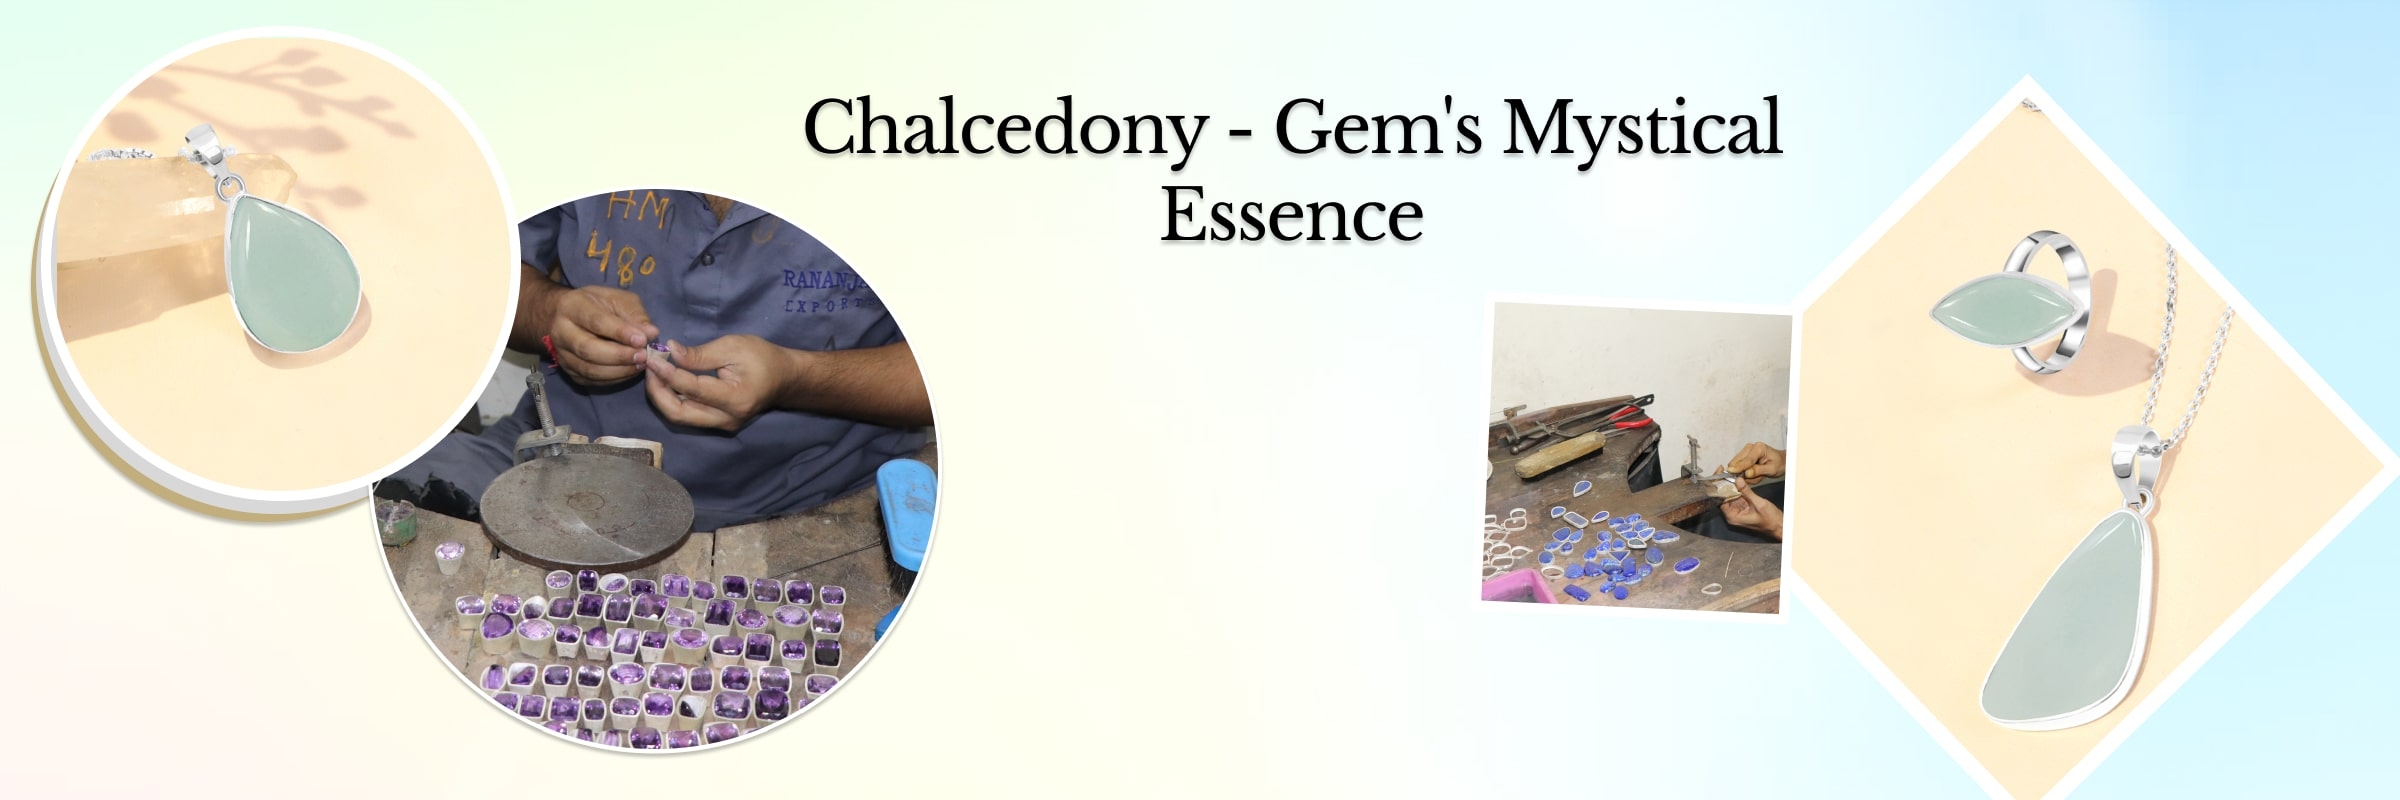 What Is Chalcedony, Basically?